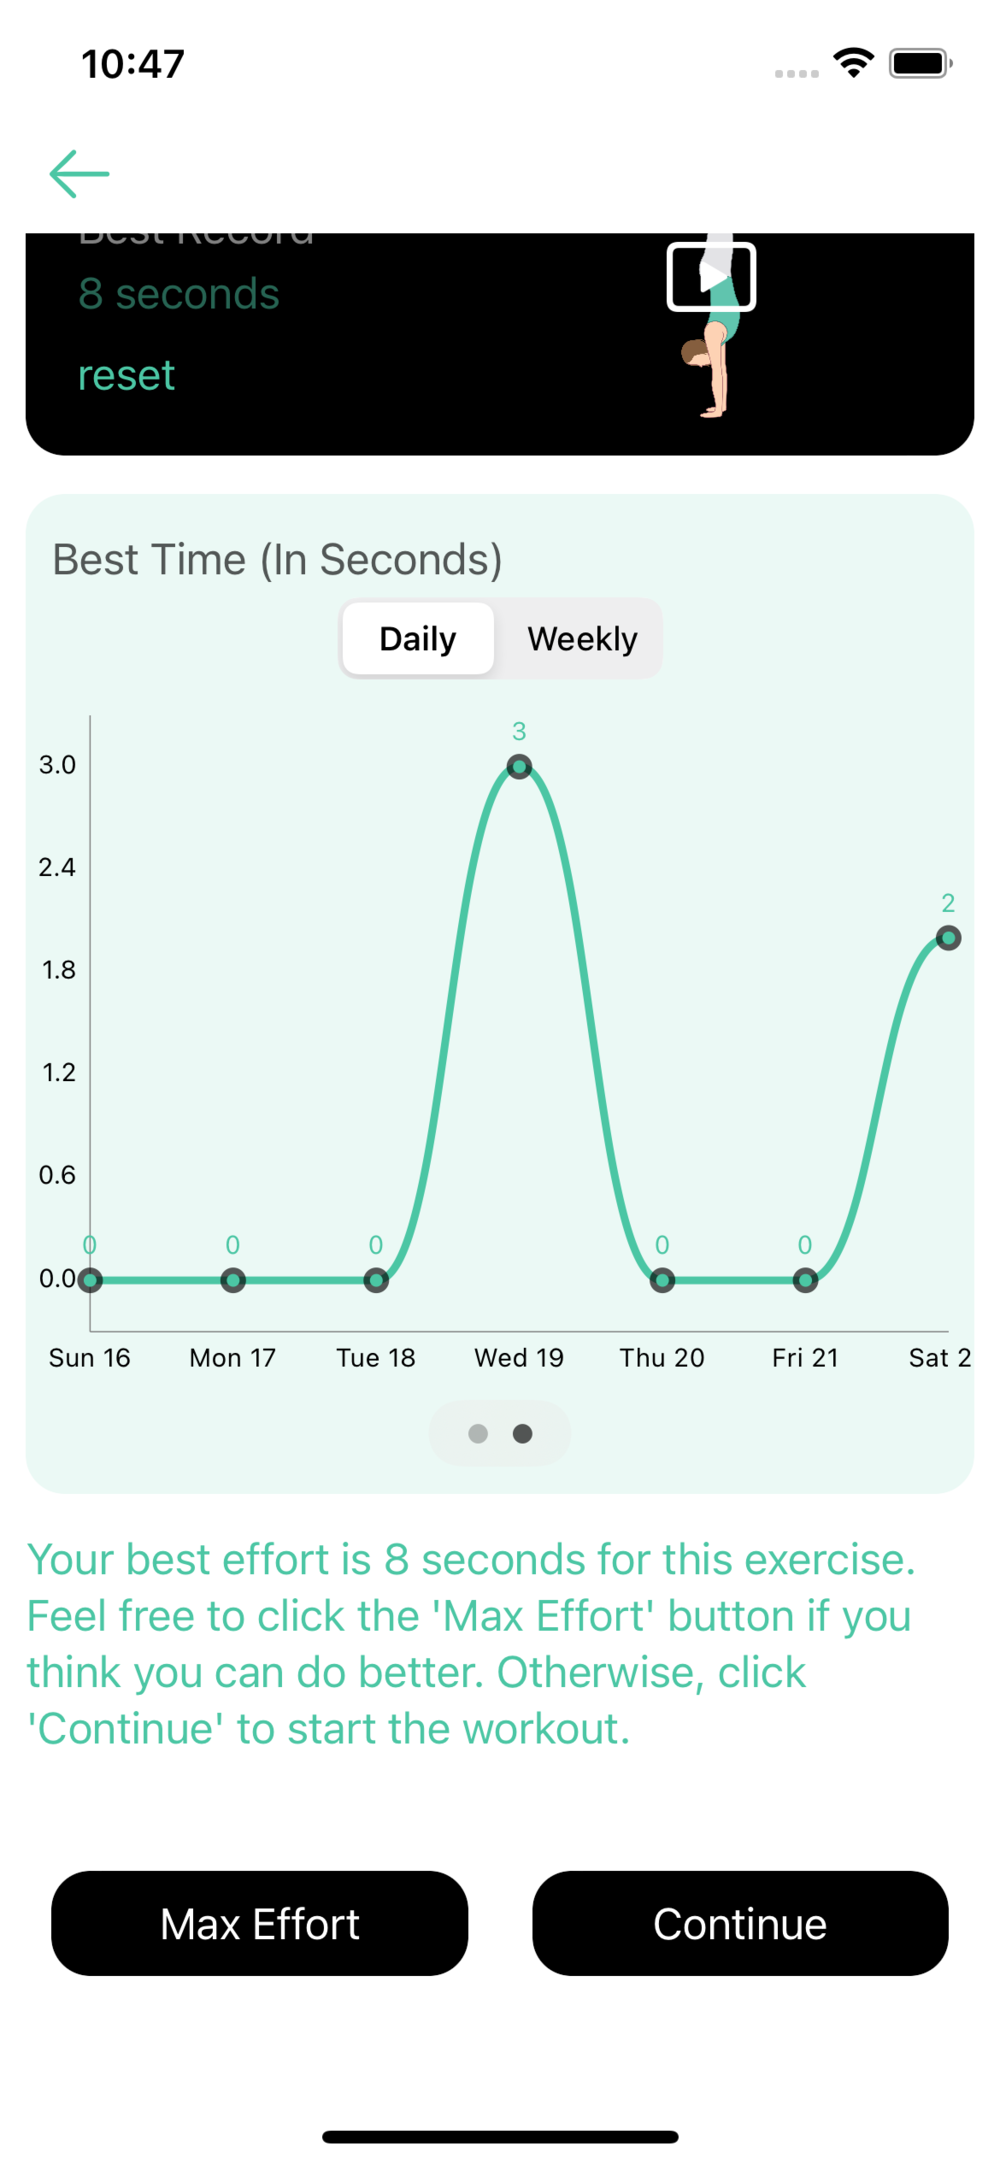 Per Exercise Best Record (Daily &amp; Weekly)